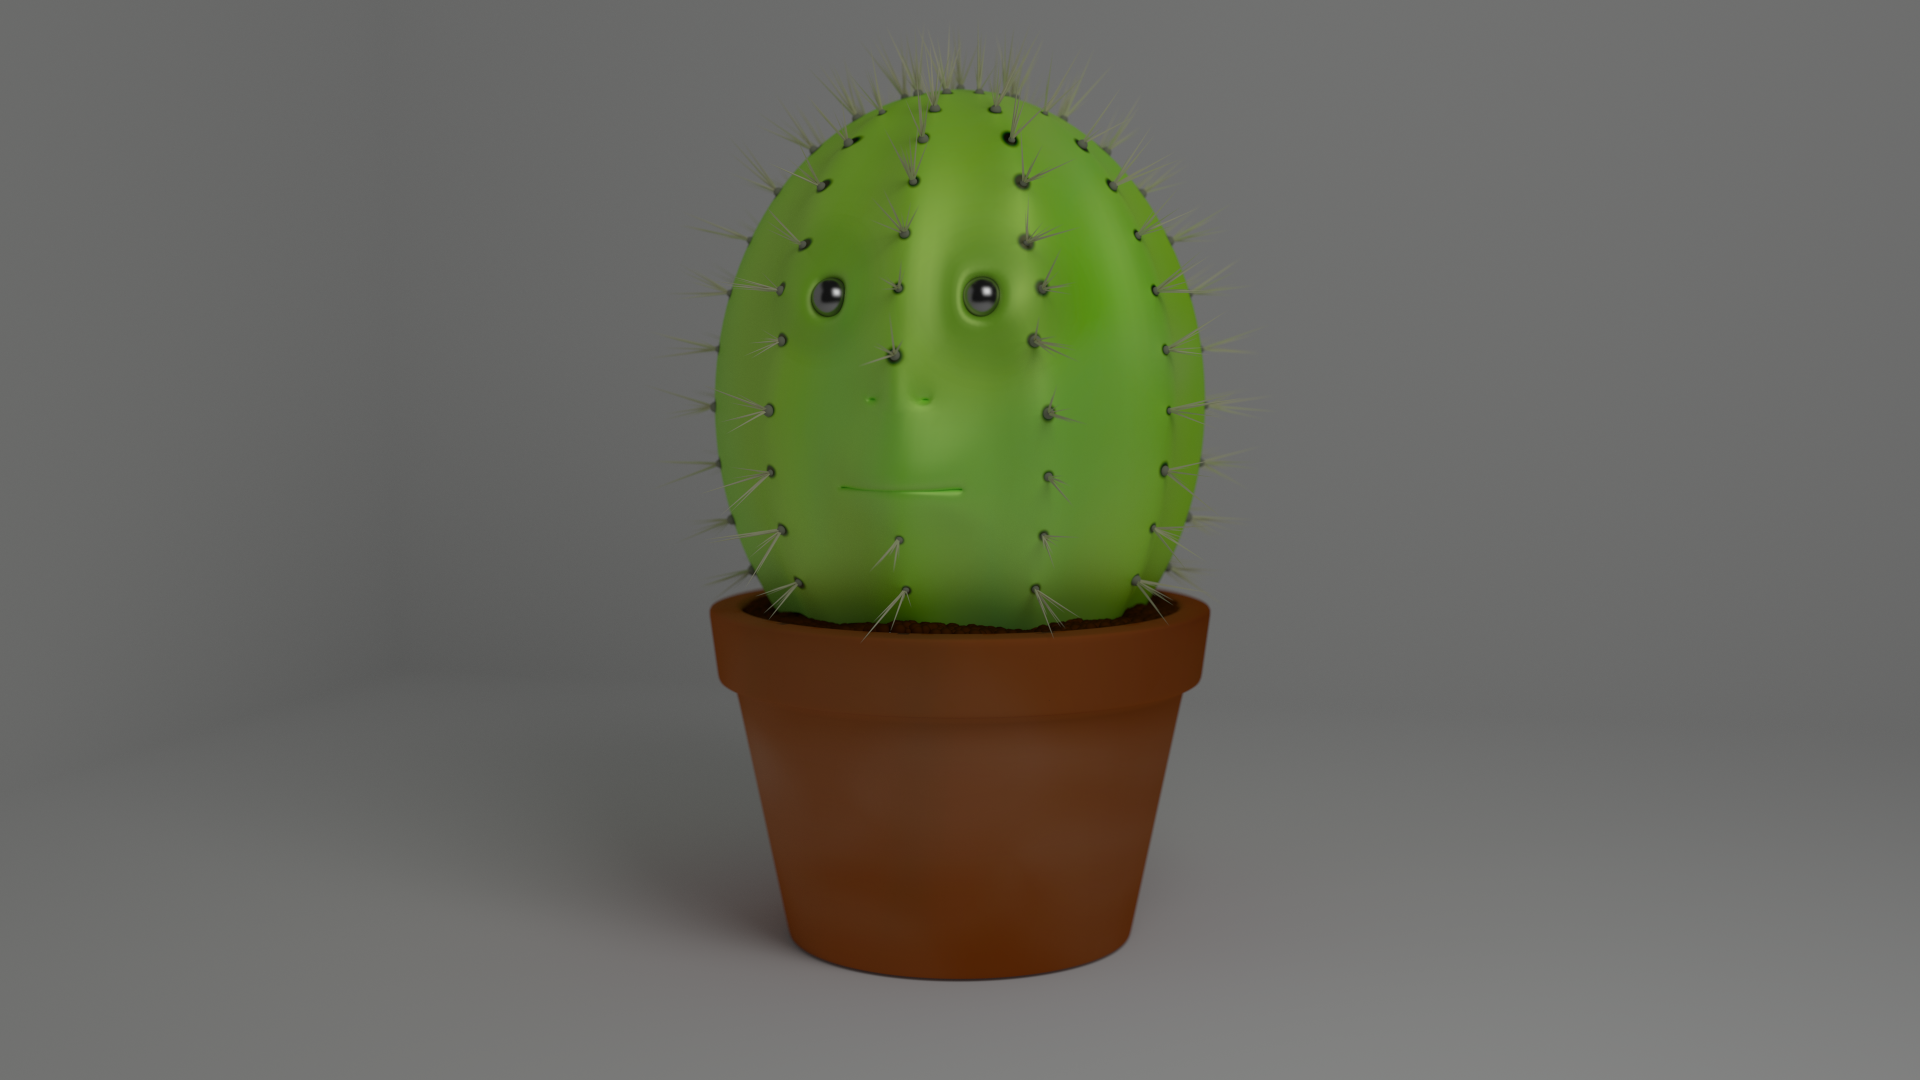 This is a cactus for a new short film I'm making!